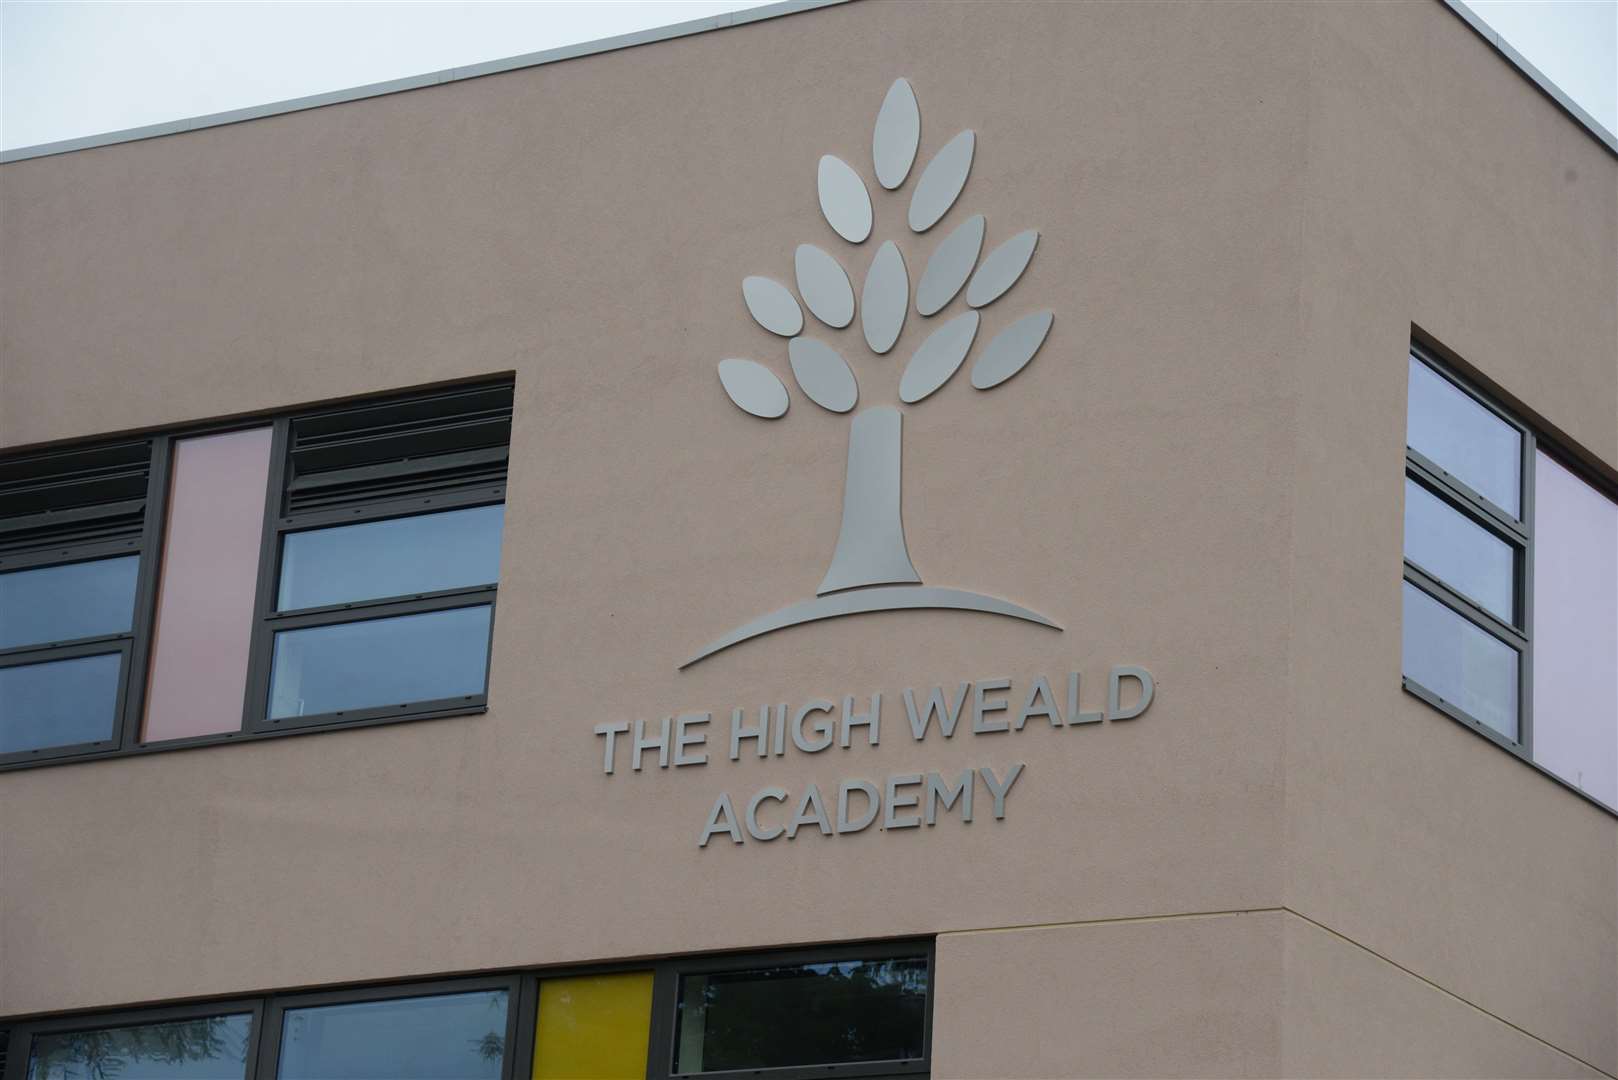 The High Weald Academy is scheduled for closure by August 2022